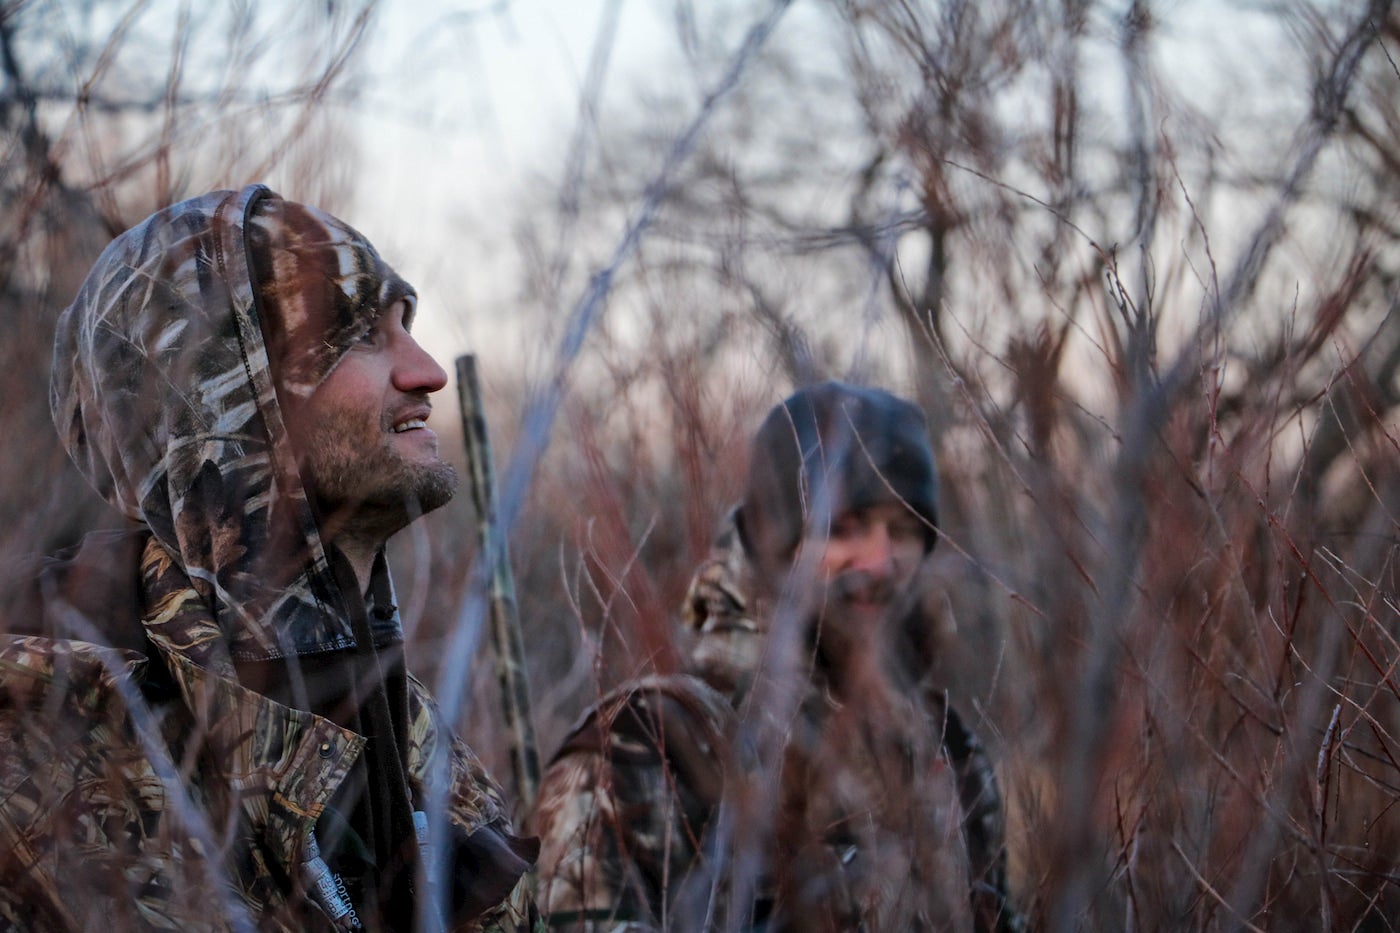 Hunters dressed in camouflage.